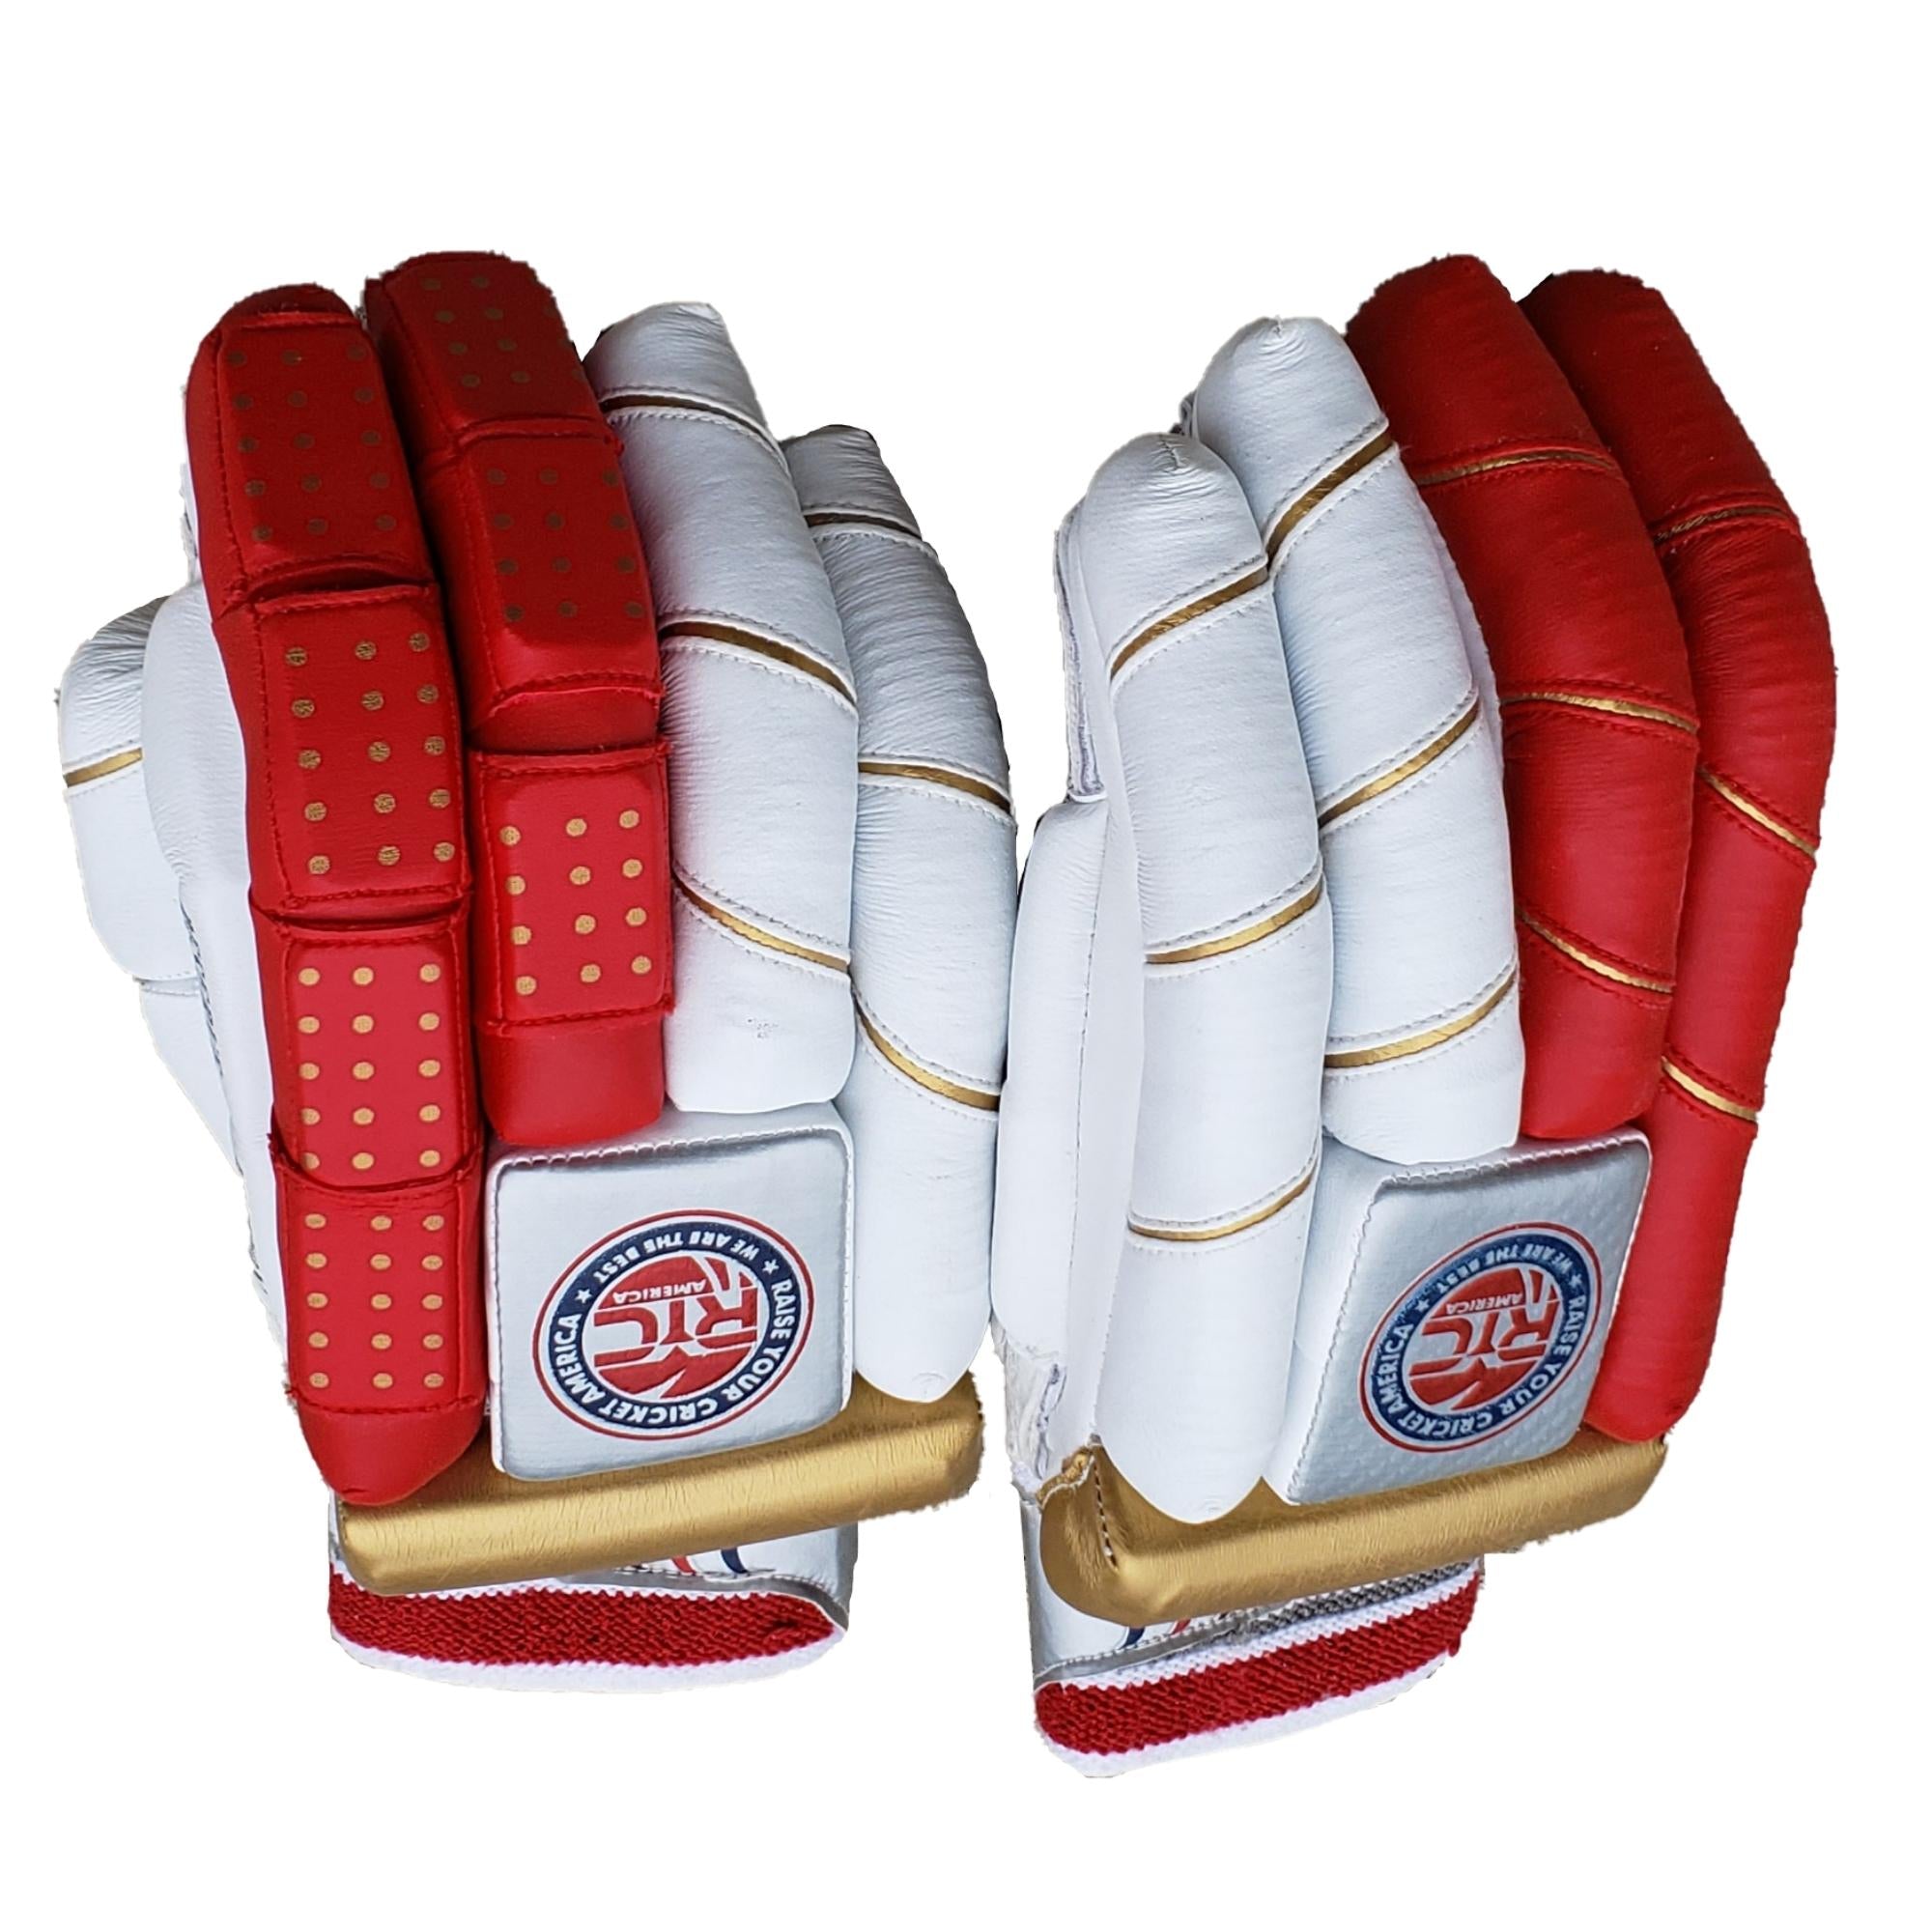 Zee Sports RYC America Cricket Batting Gloves Reserve Edition Red Golden